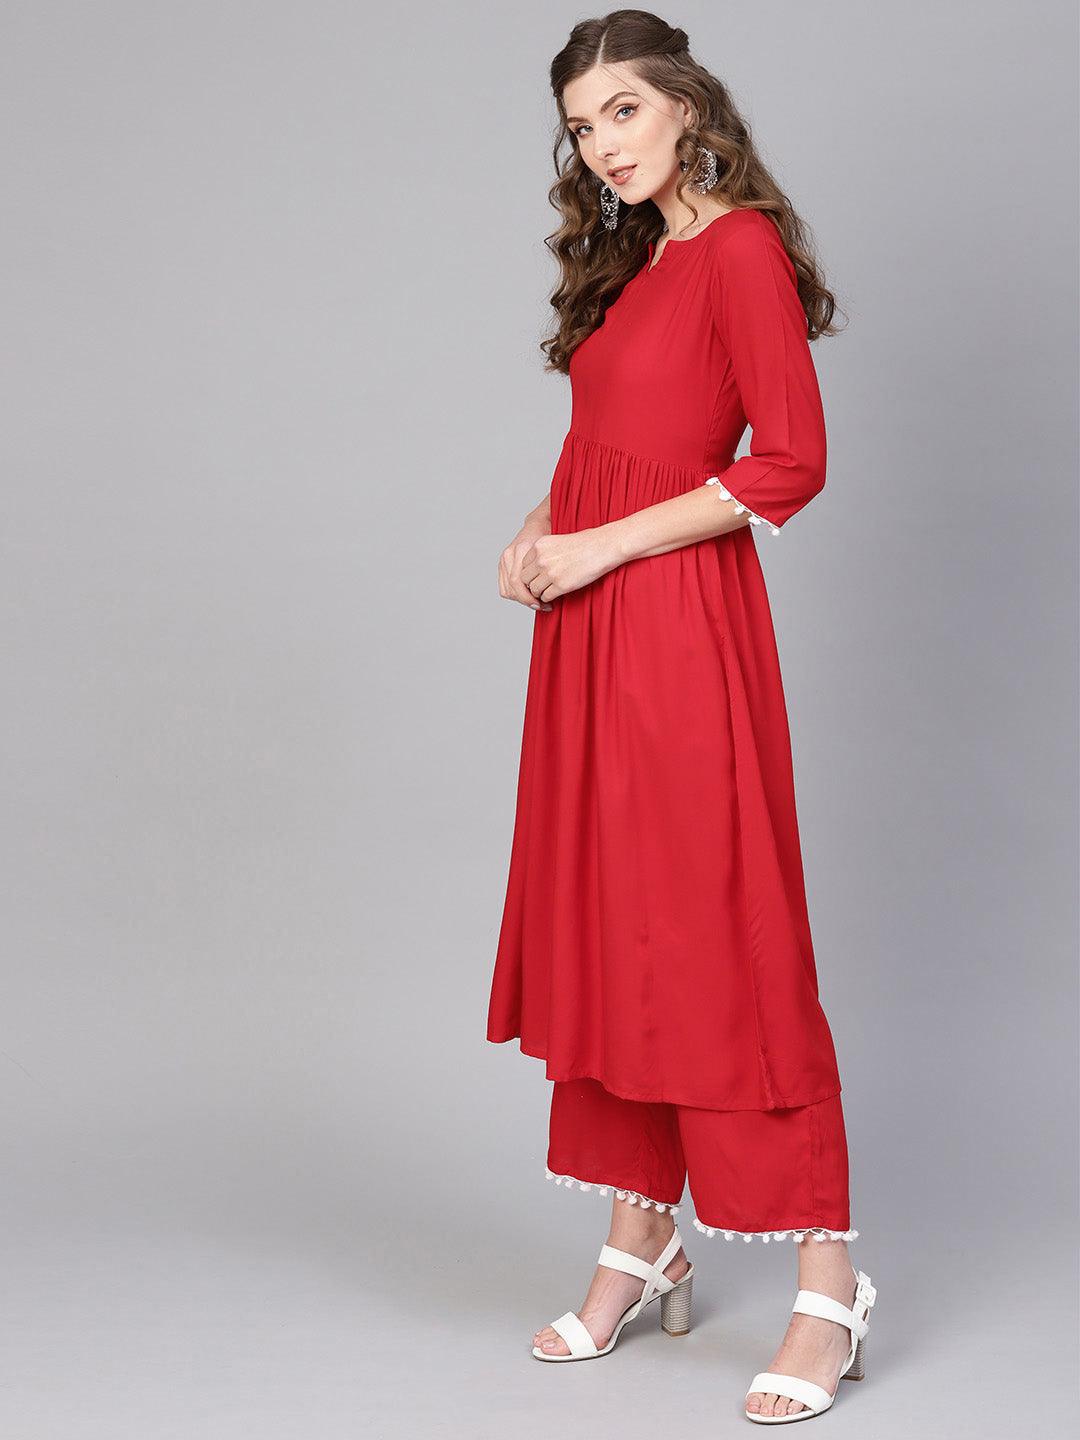 Red Solid Rayon Suit Set - Libas